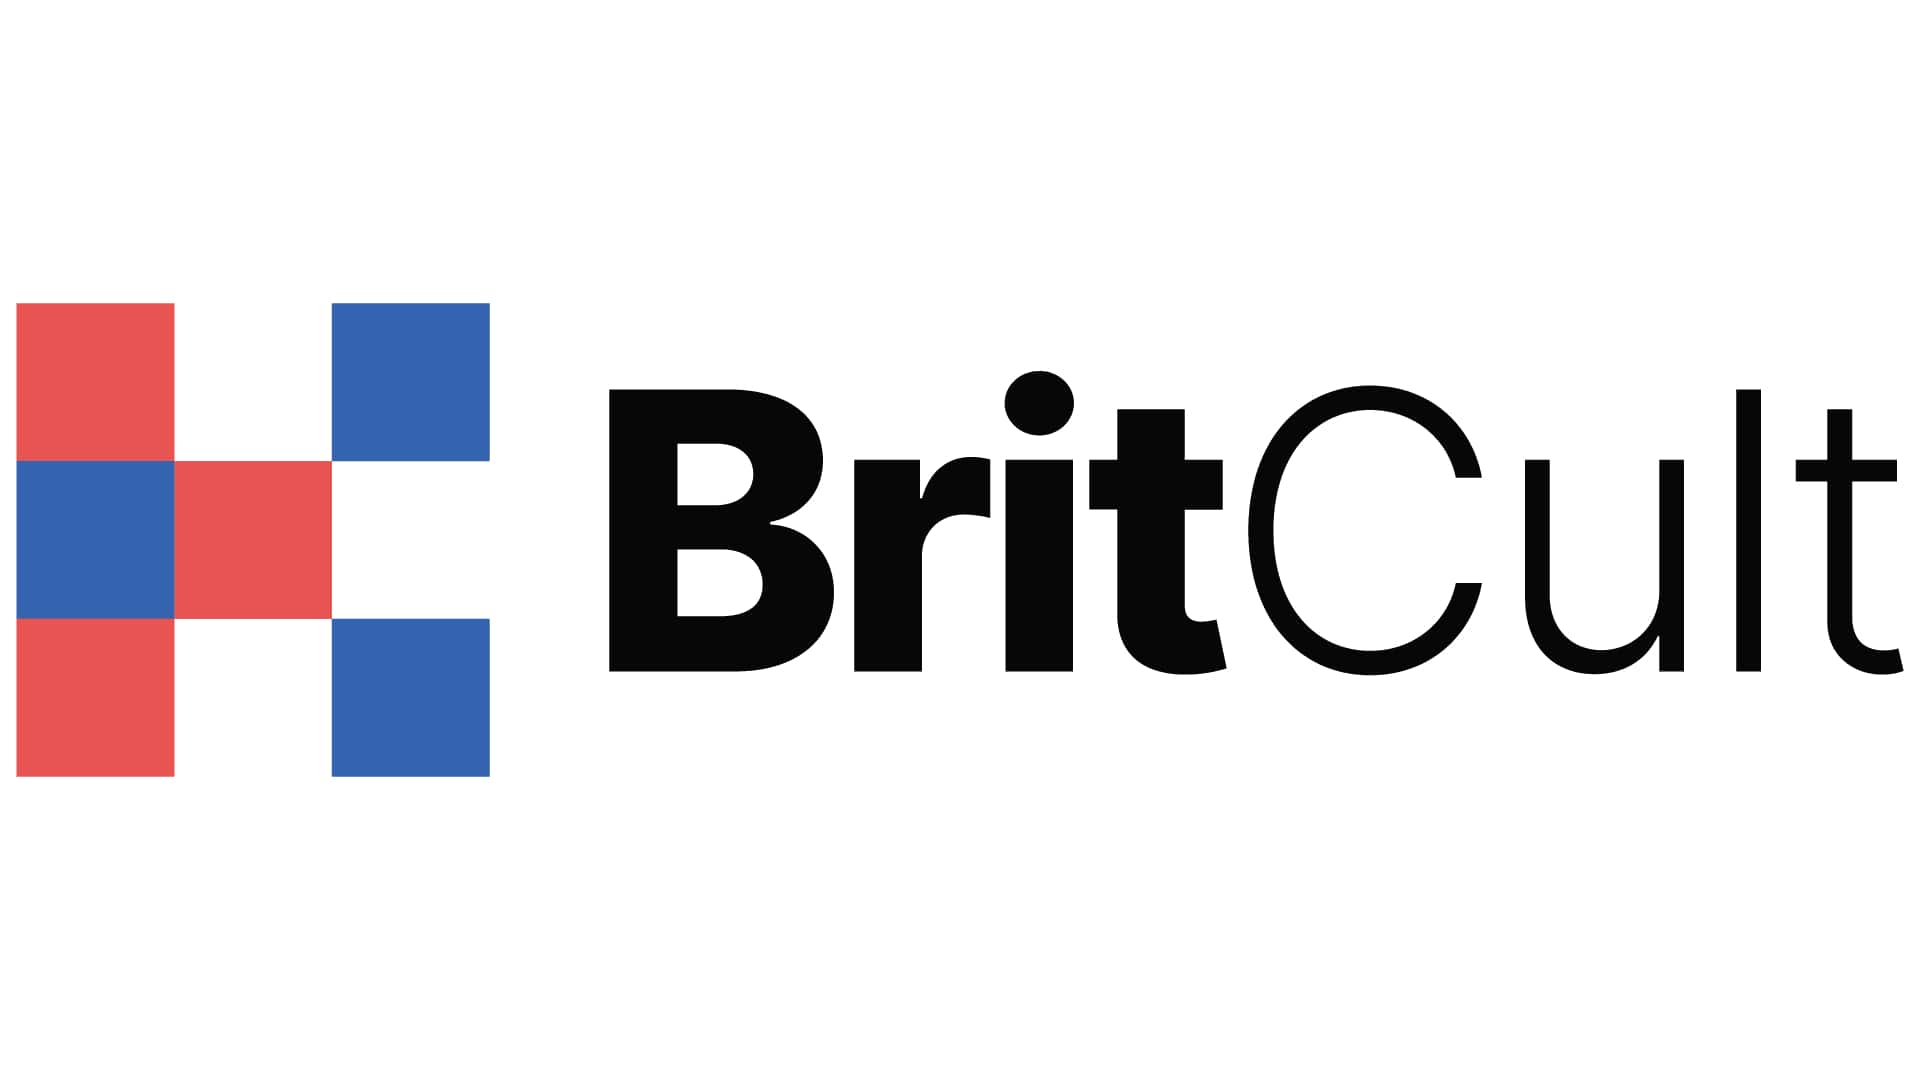 German Association for the Study of British Cultures Logo